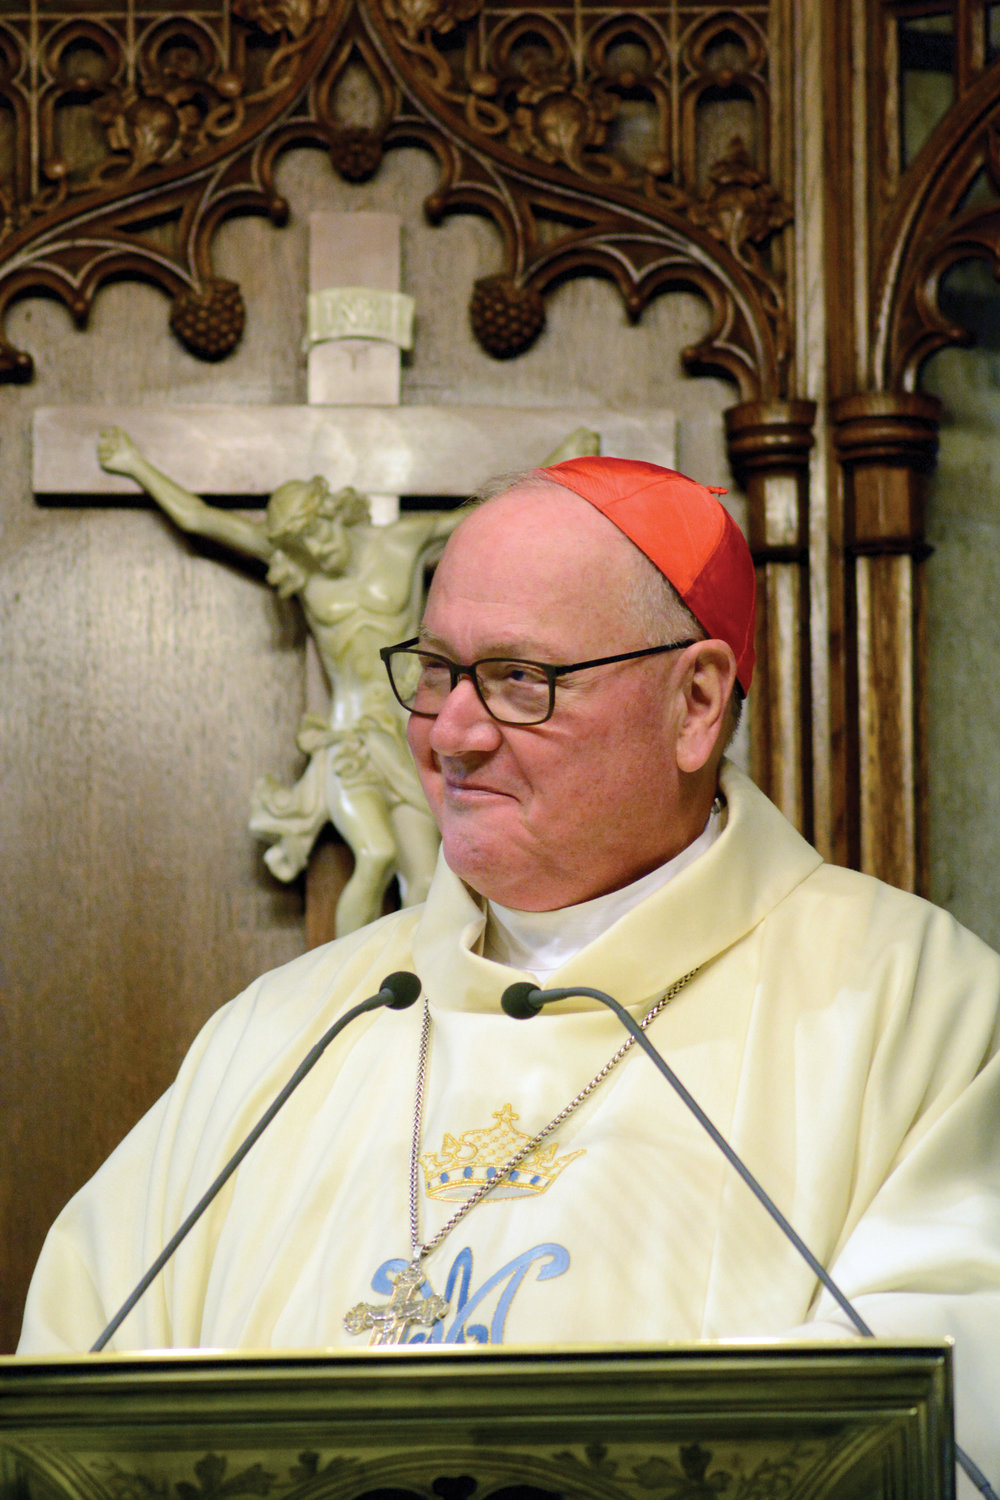 Cardinal Dolan delivers his homily at Mass.